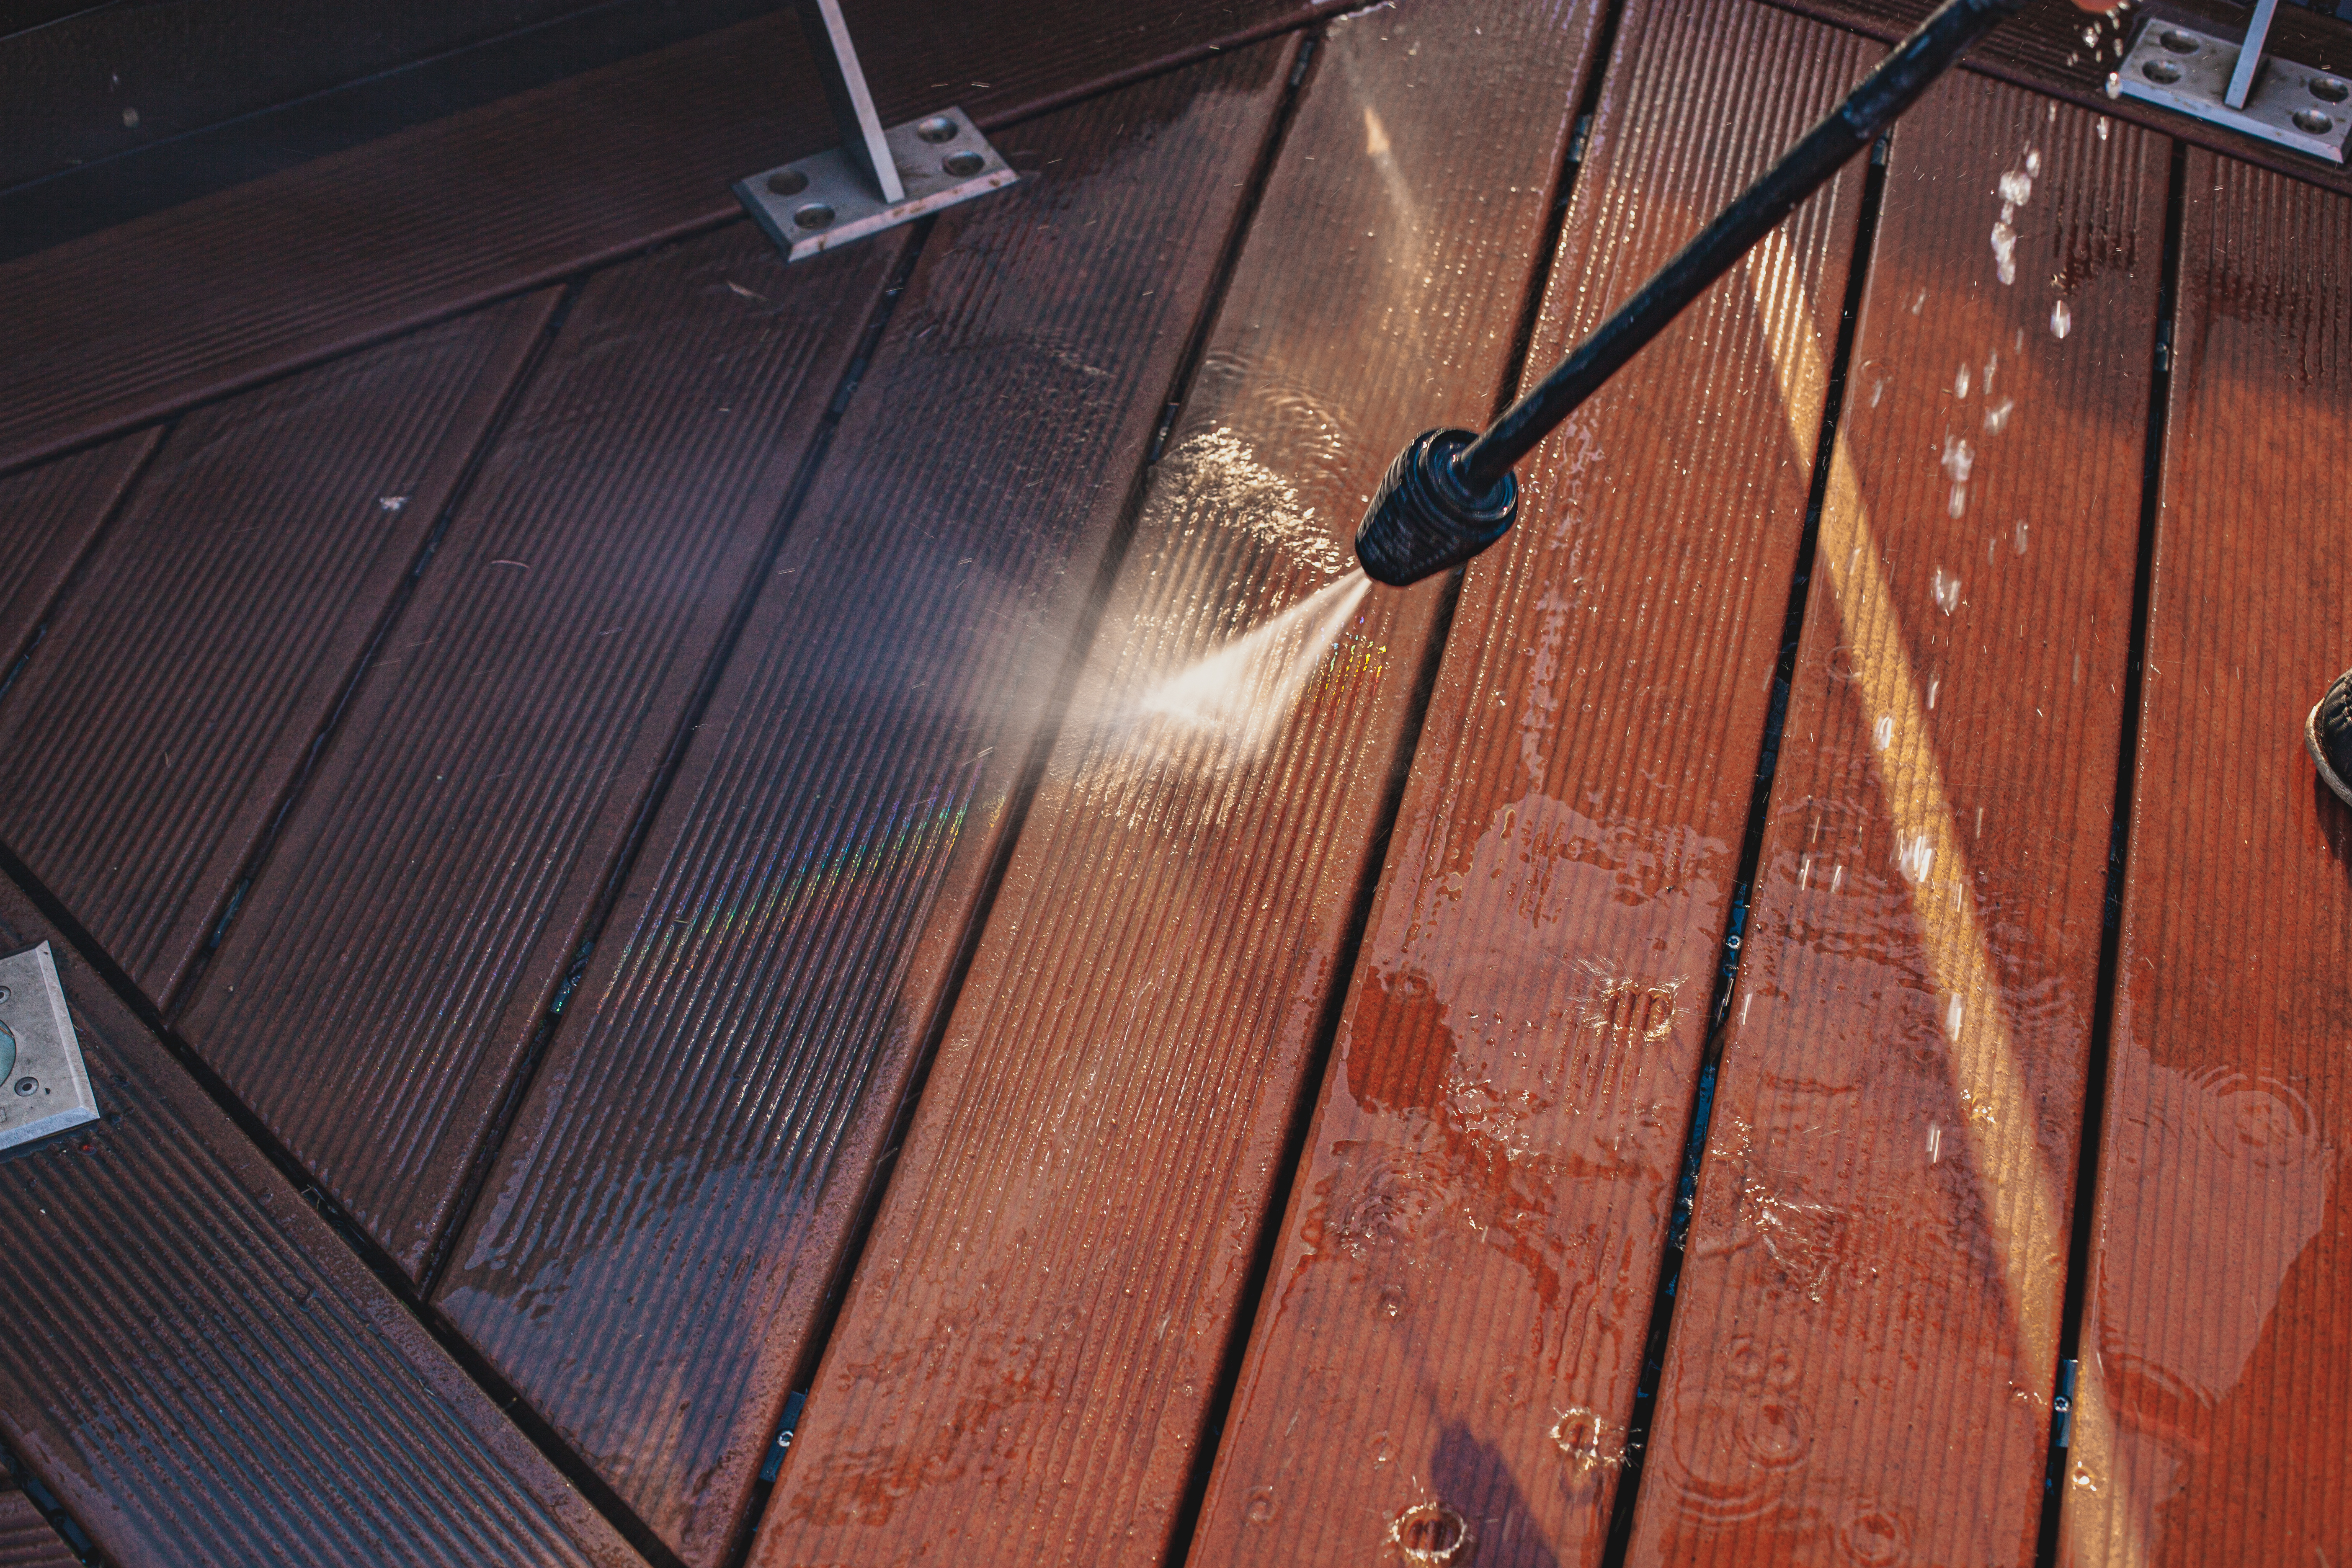 Close-up of a power washer cleaning a wooden deck, showing water spraying and wood brightening.